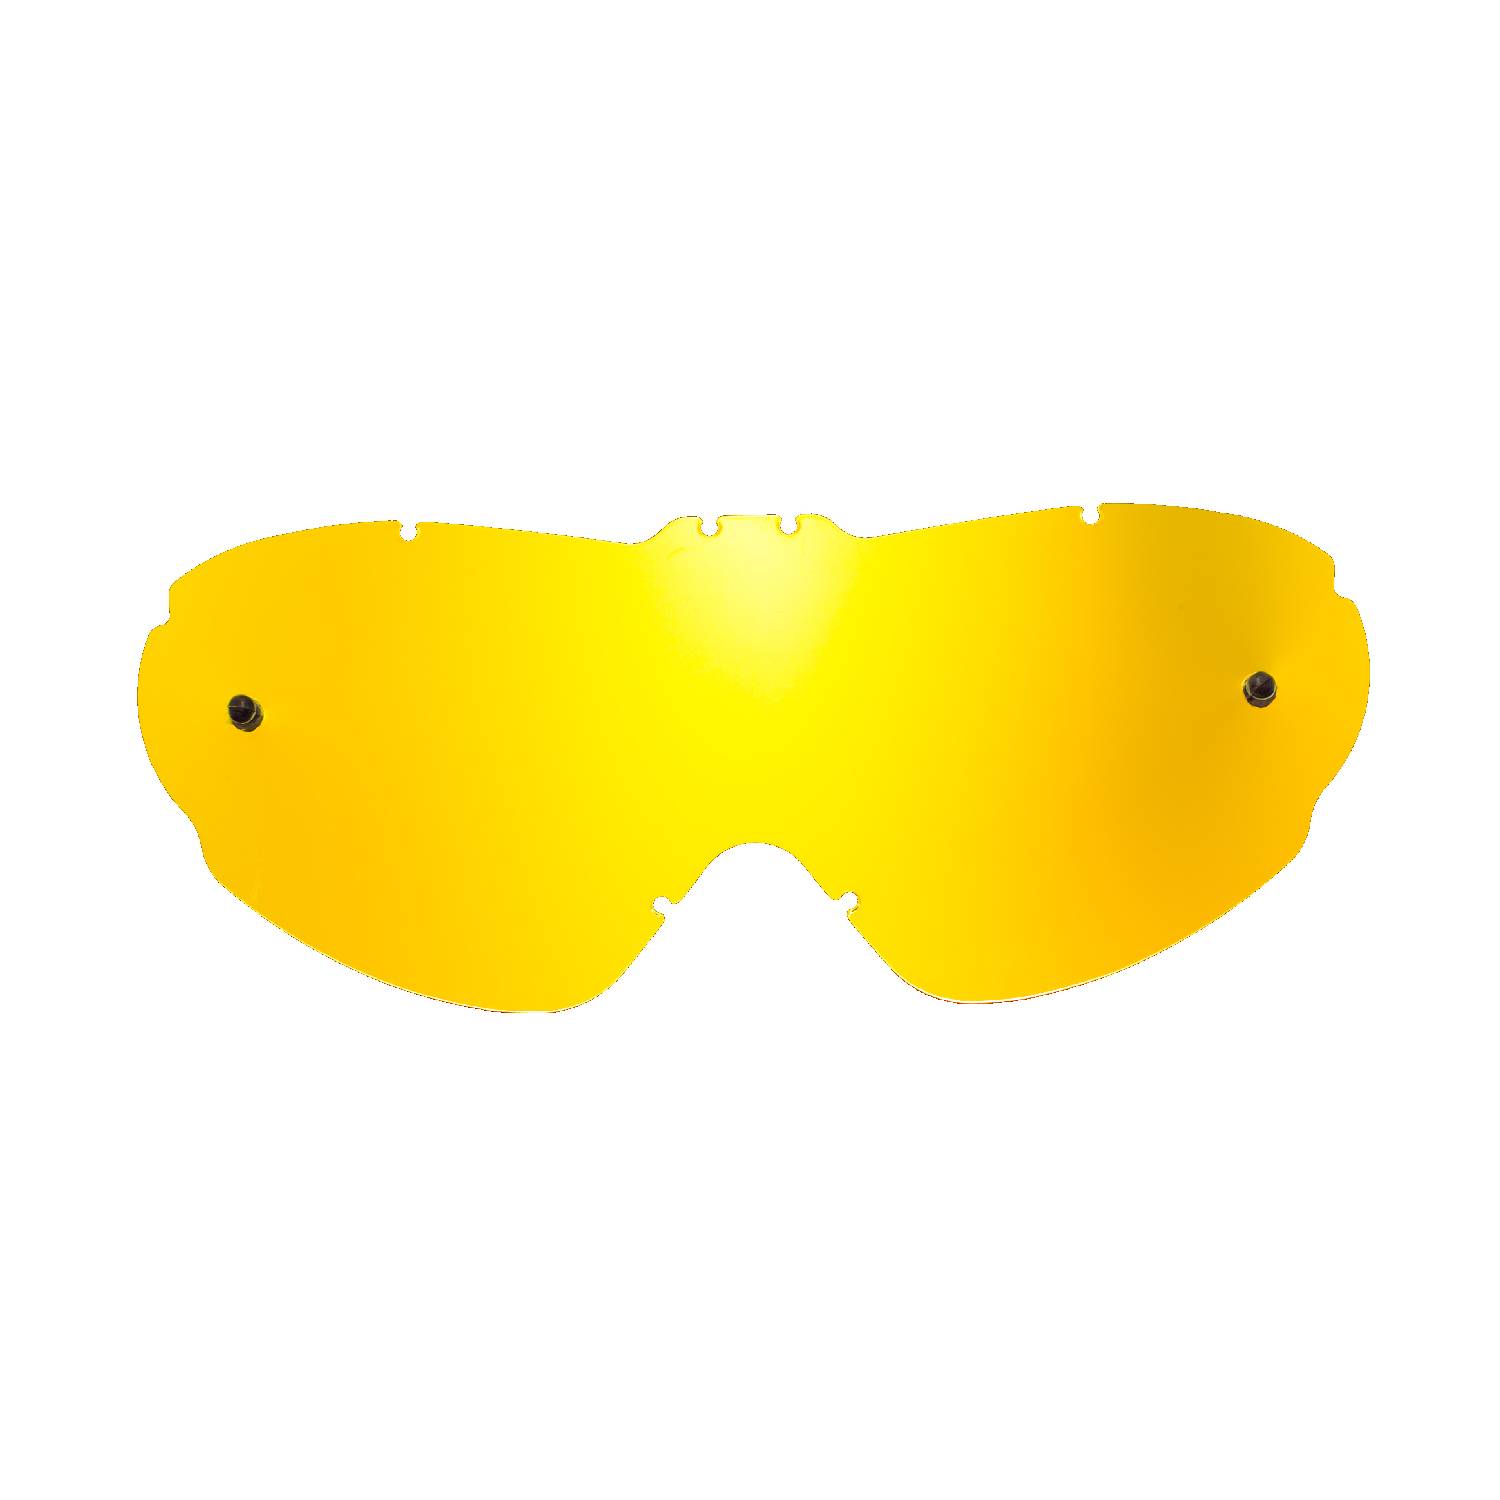 gold-toned mirrored replacement lenses for goggles compatible for Scott Hi voltage work goggle